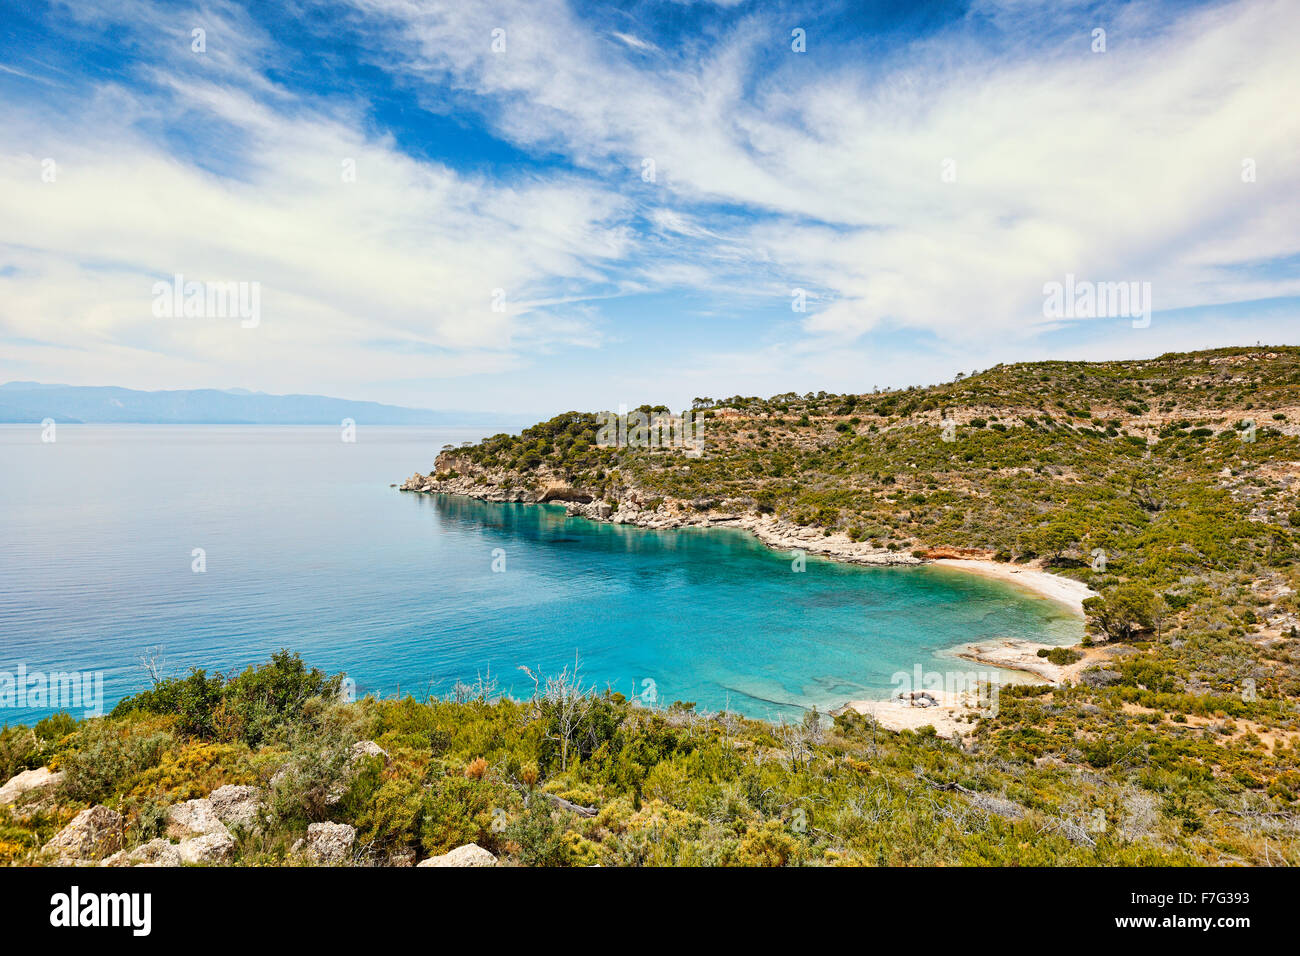 A small beach on the west side of Spetses island, Greece Stock Photo